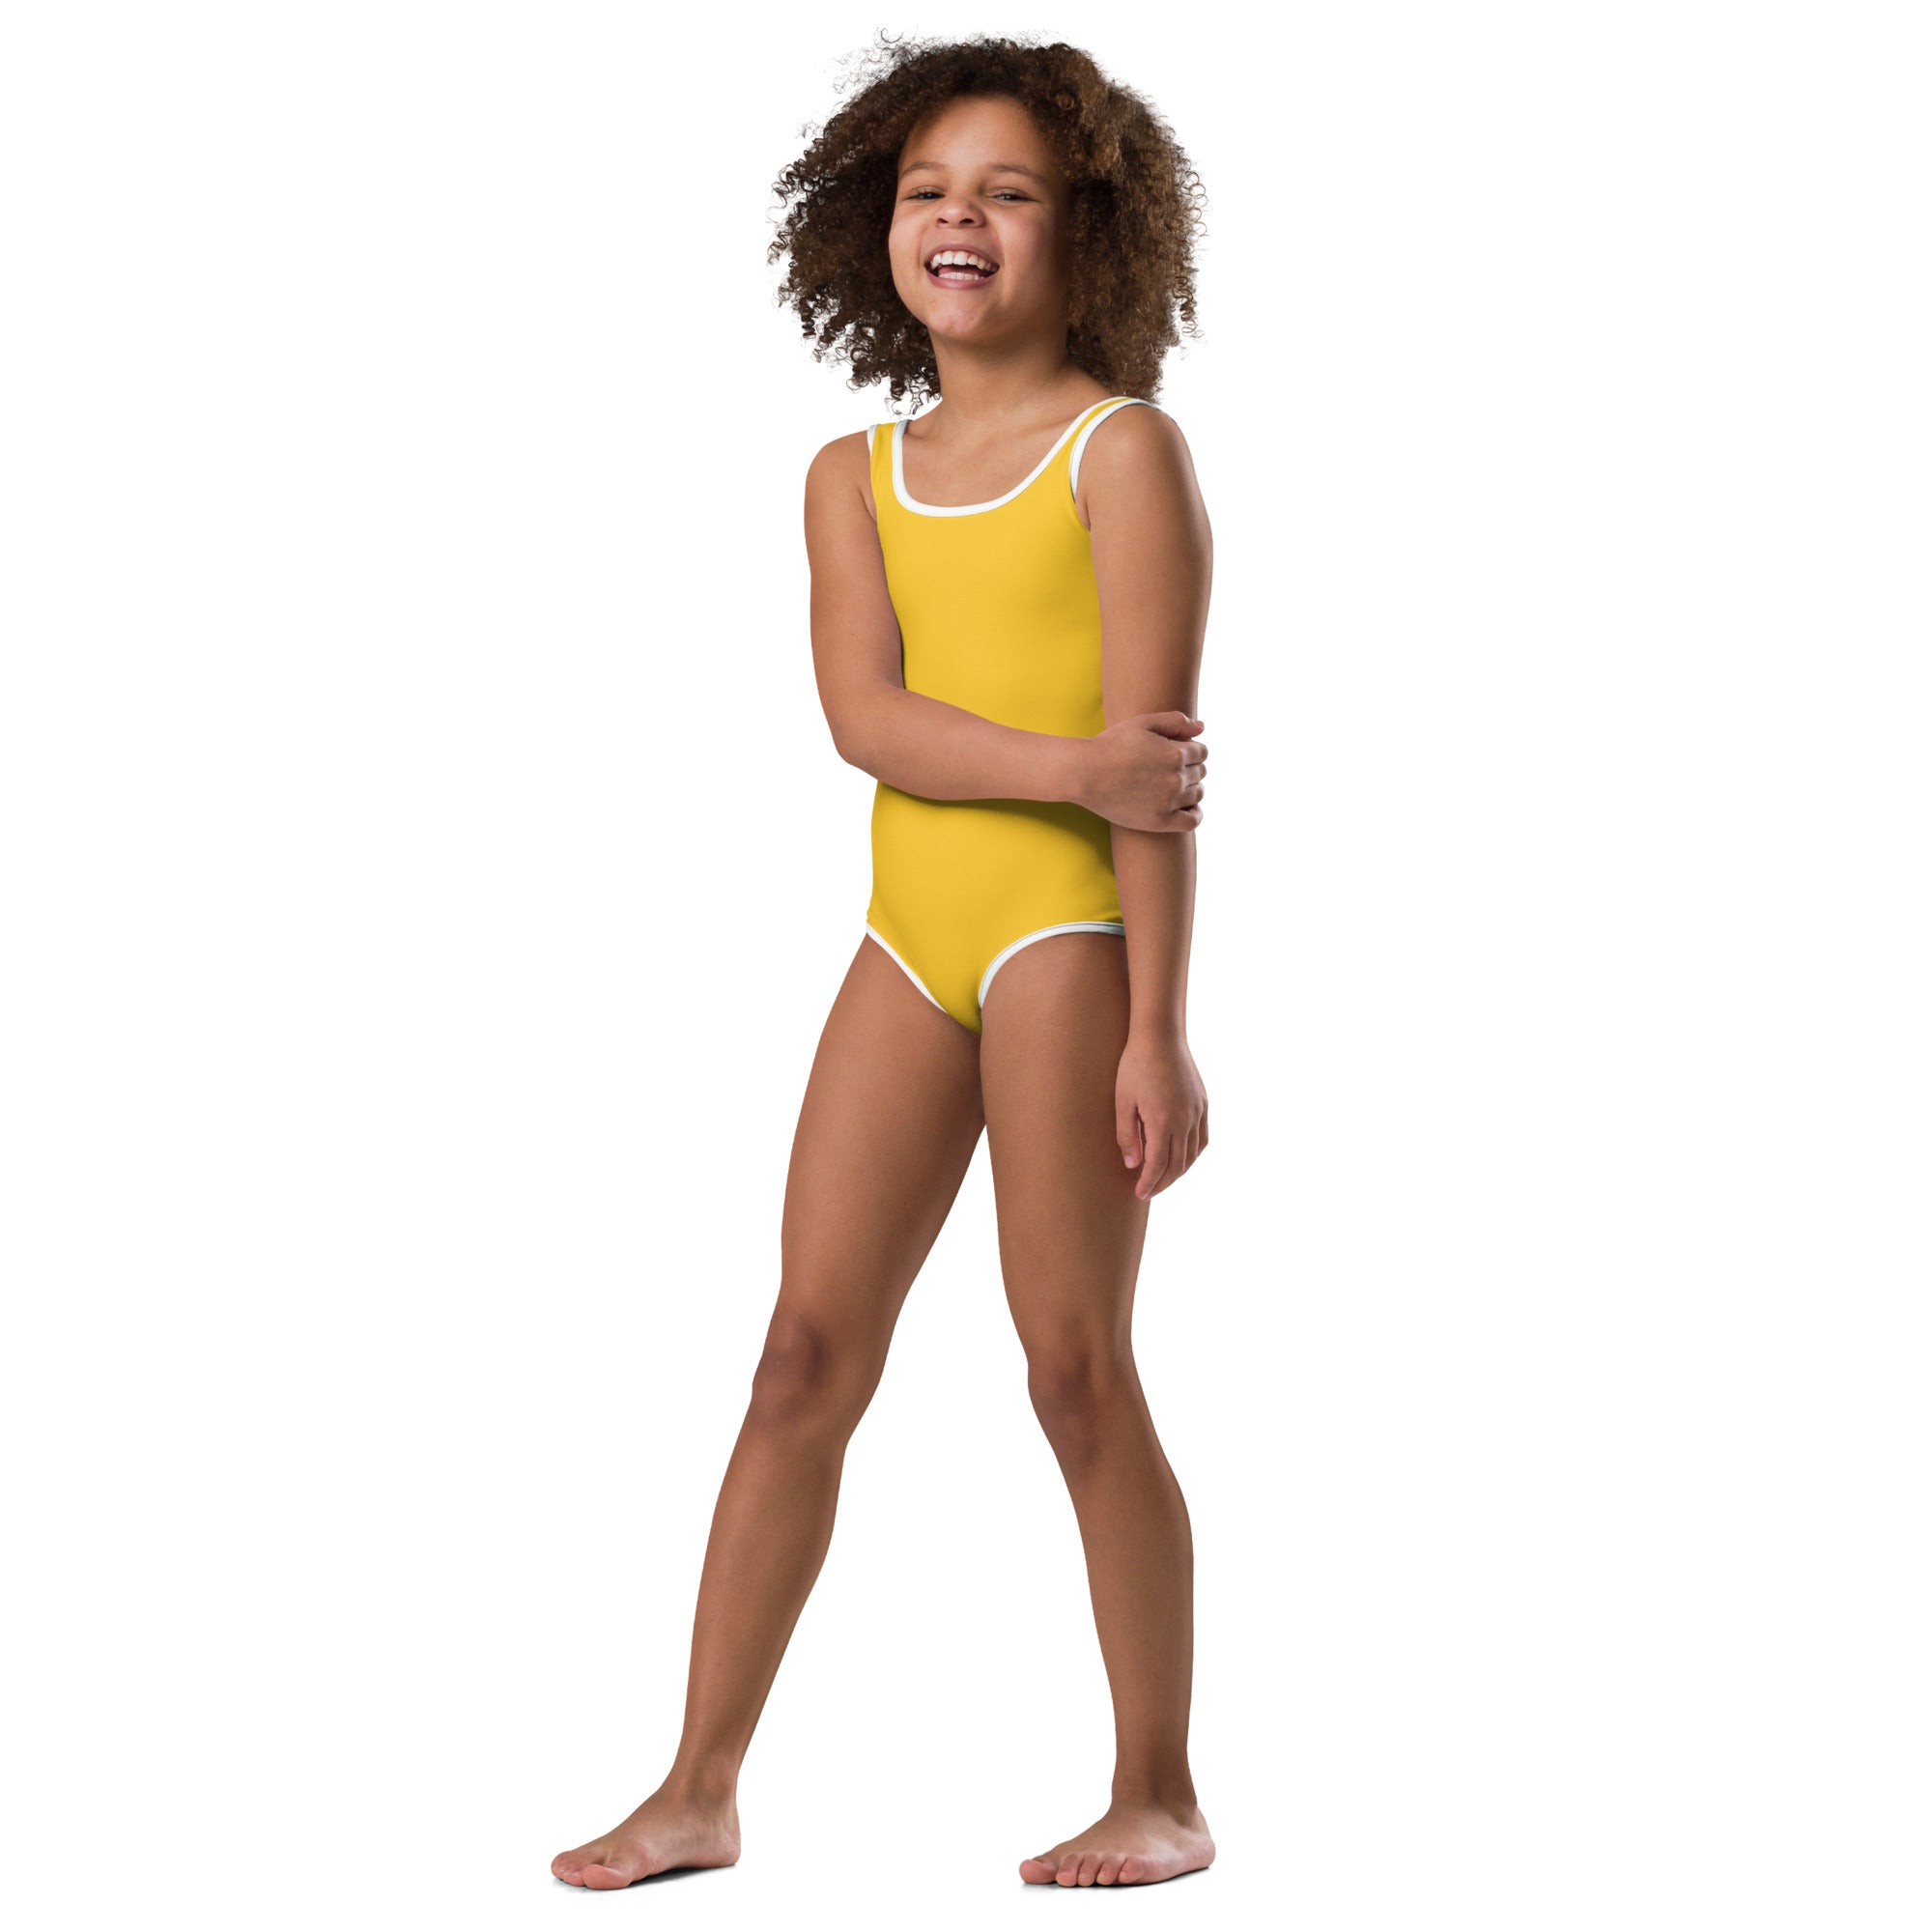 All-Over Print Kids Swimsuit- Yellow